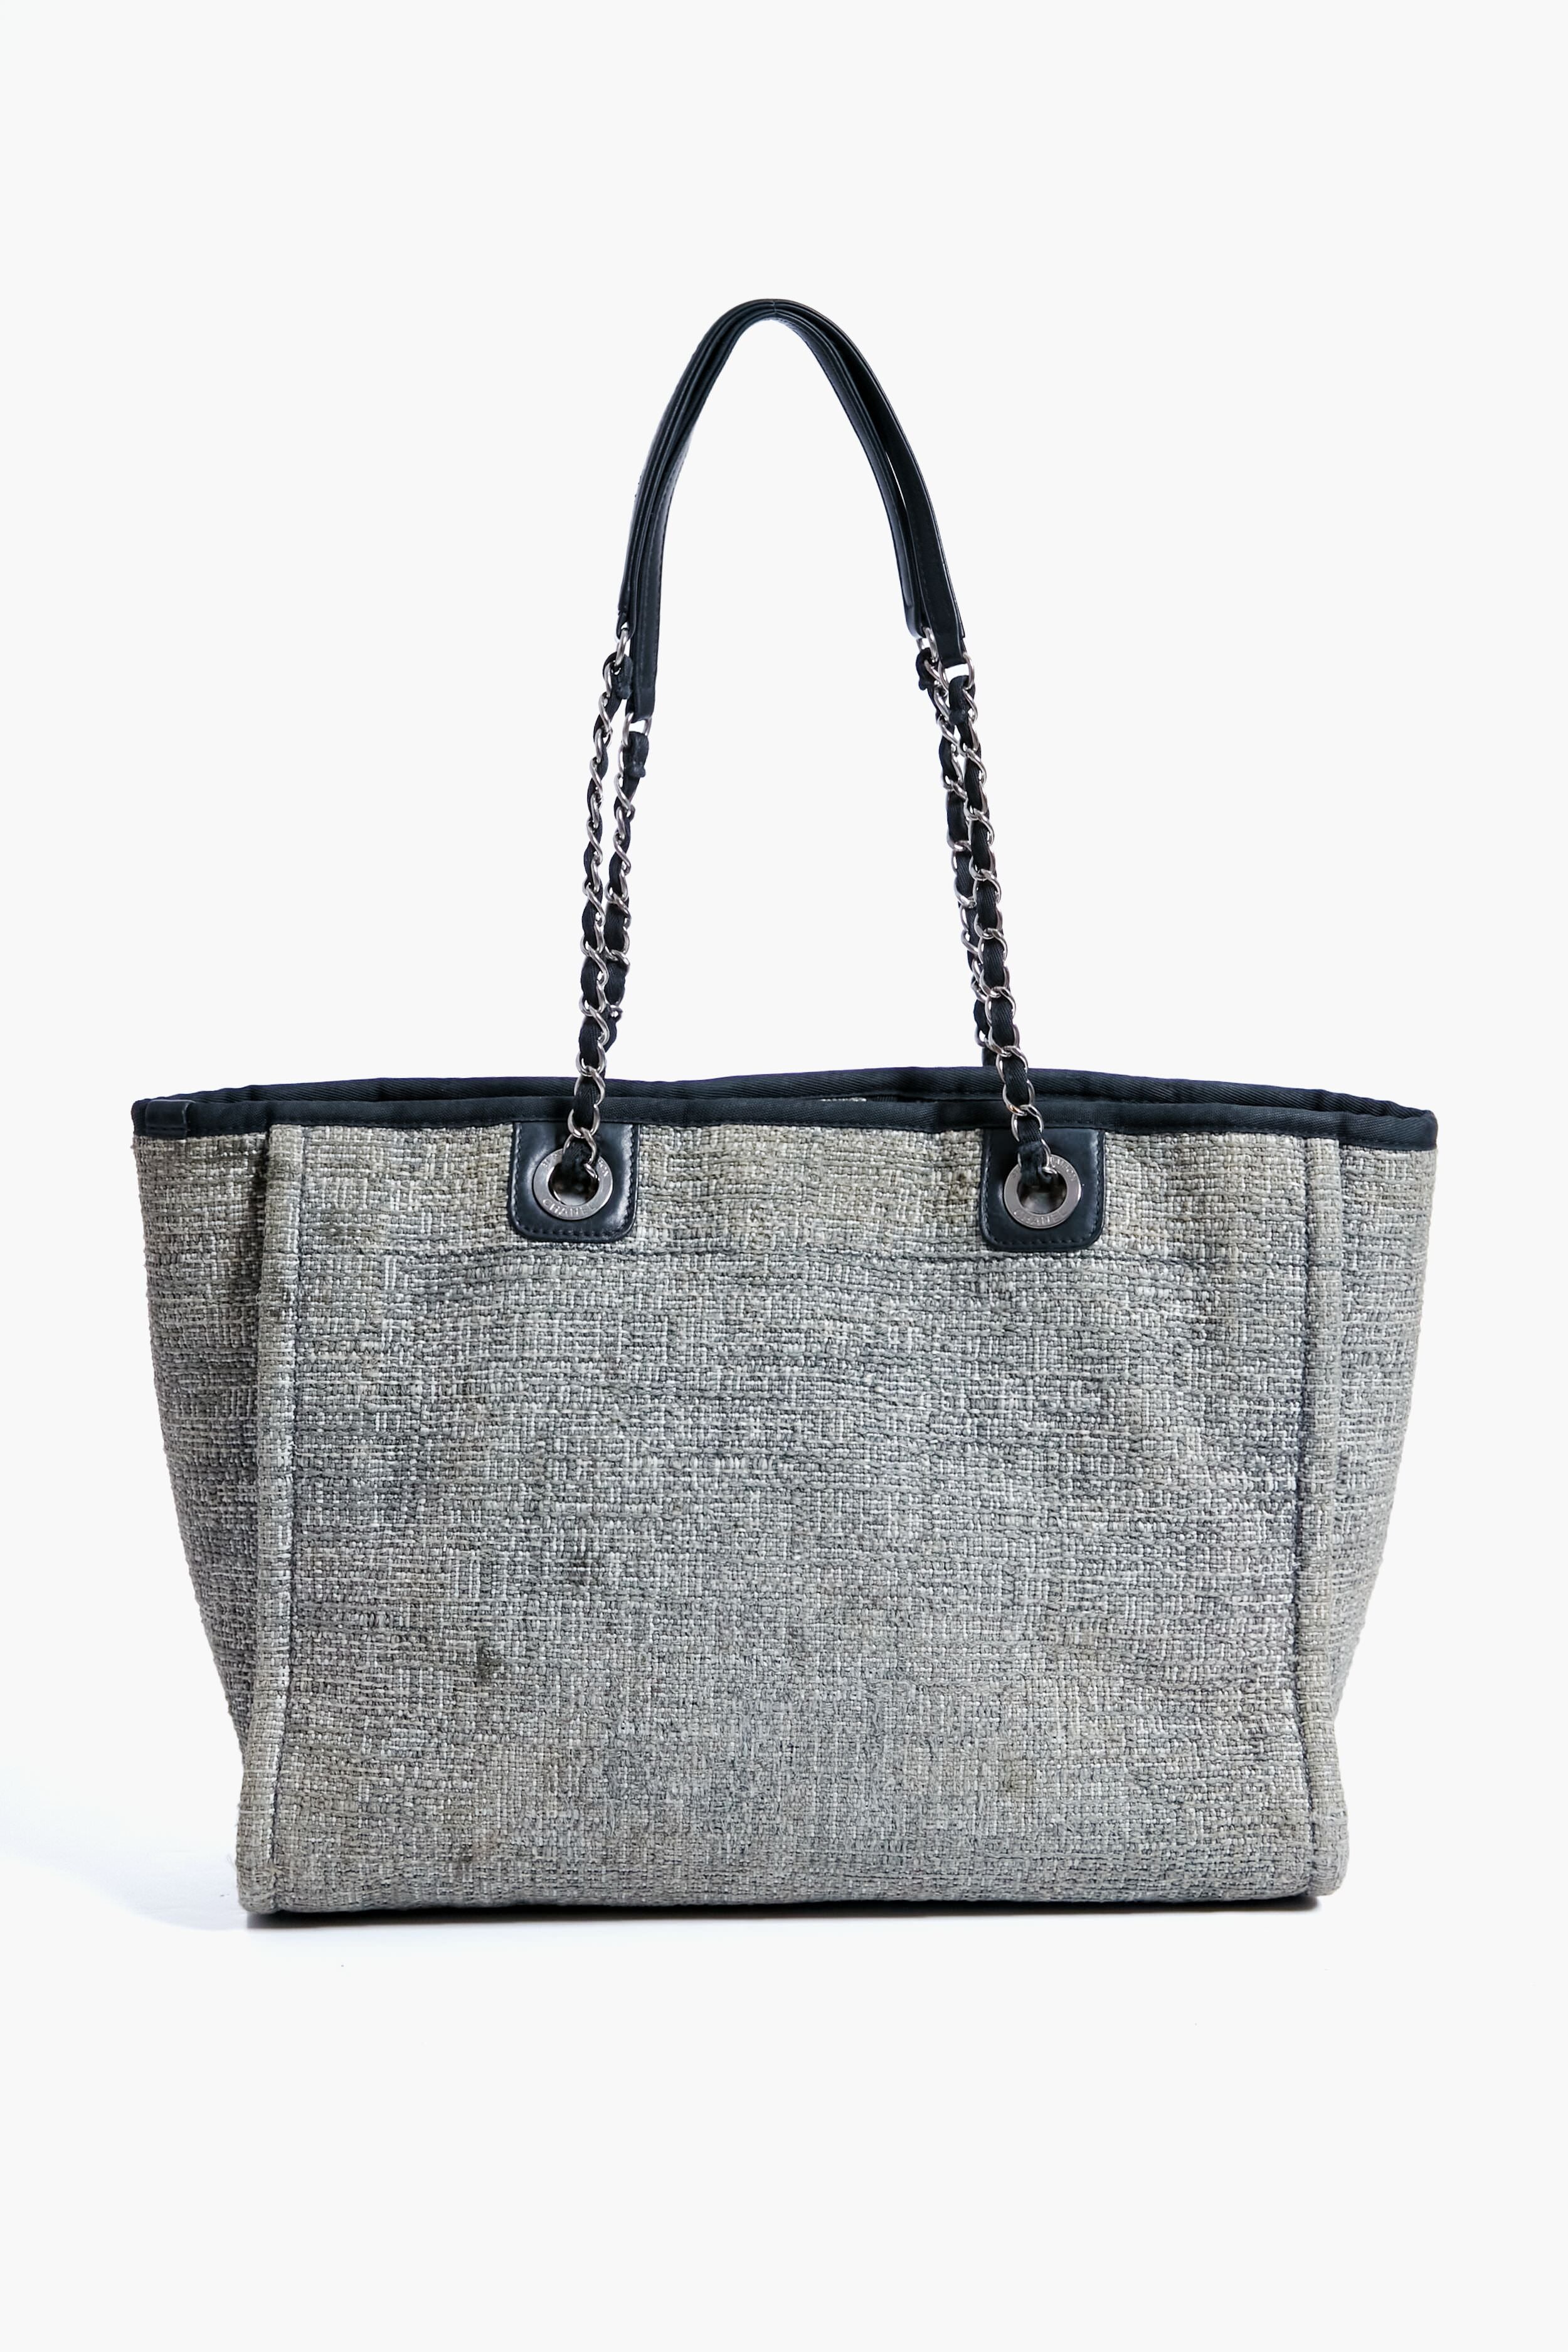 CHANEL Grey Deauville MM Chain Tote